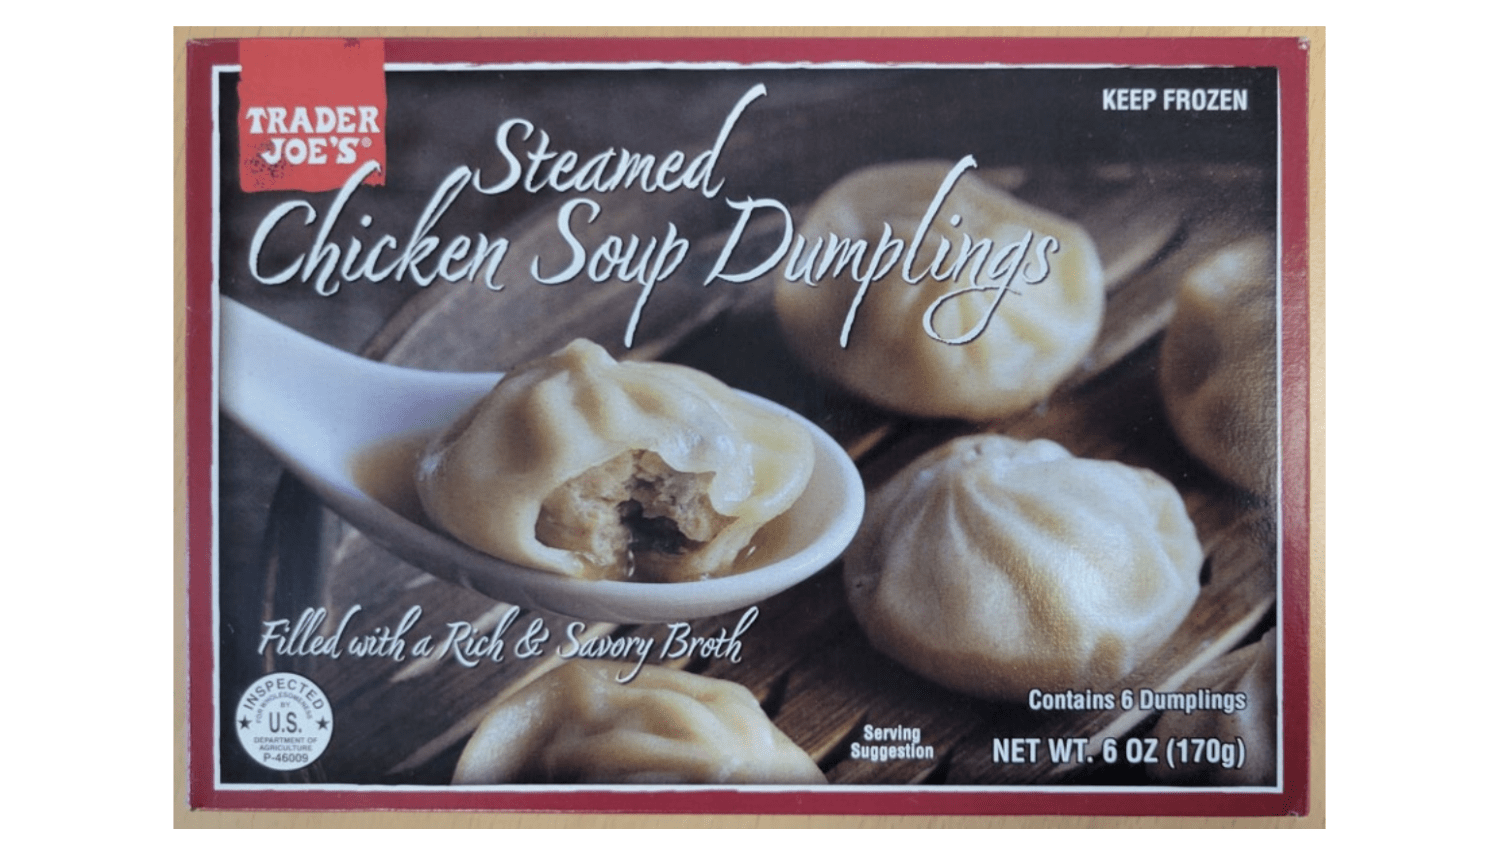 Trader Joe's recalls steamed chicken soup dumplings. What to know